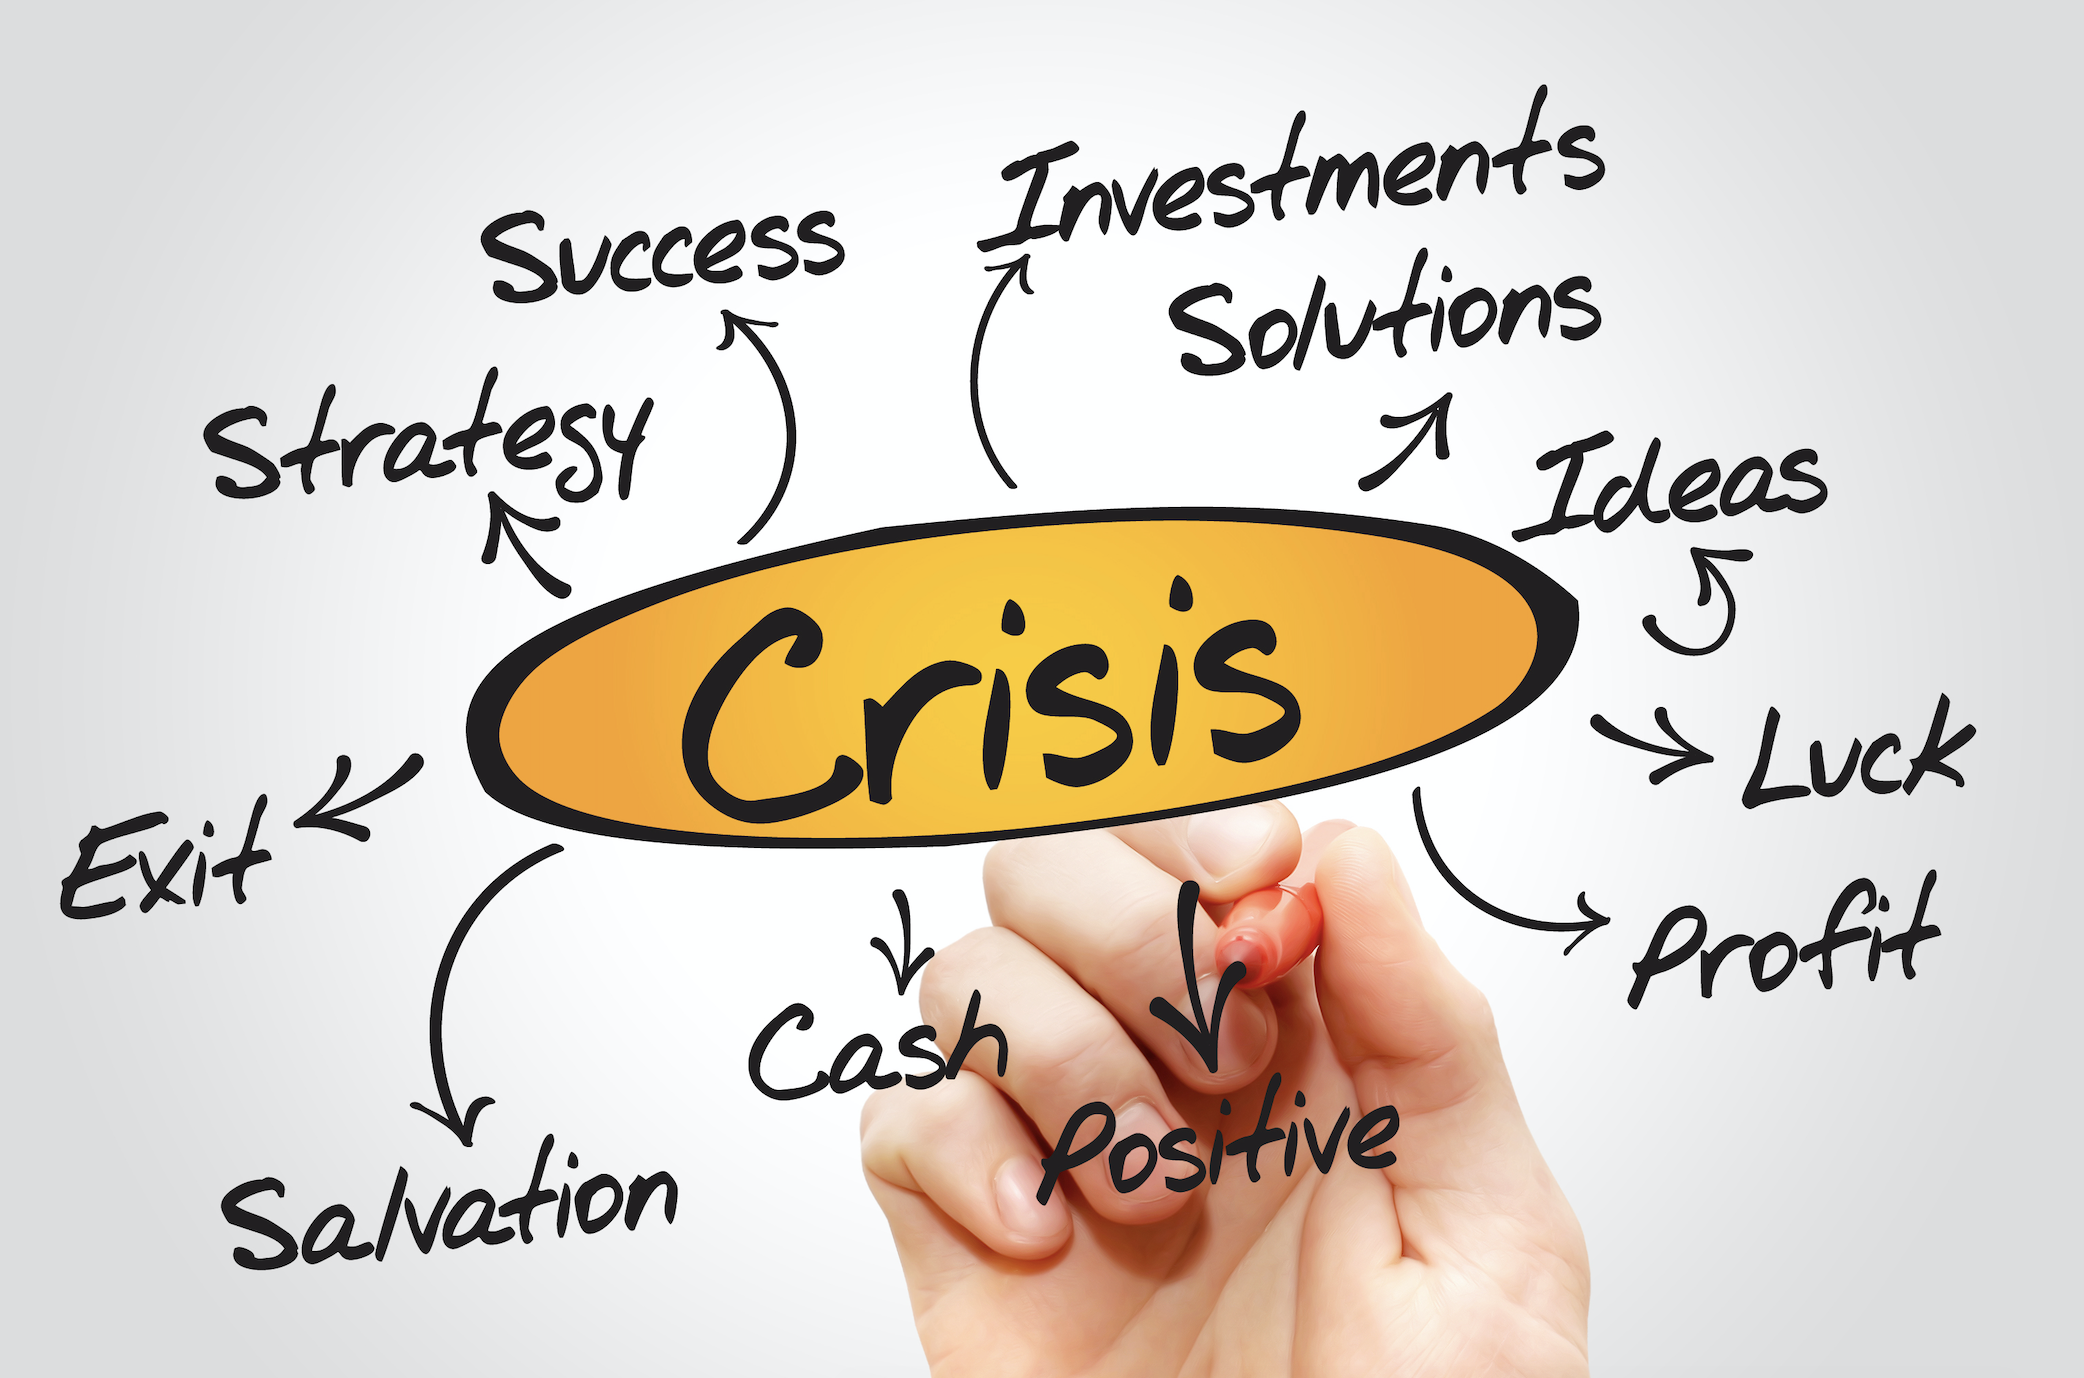 14-ways-to-build-a-solid-crisis-management-strategy-harris-whitesell